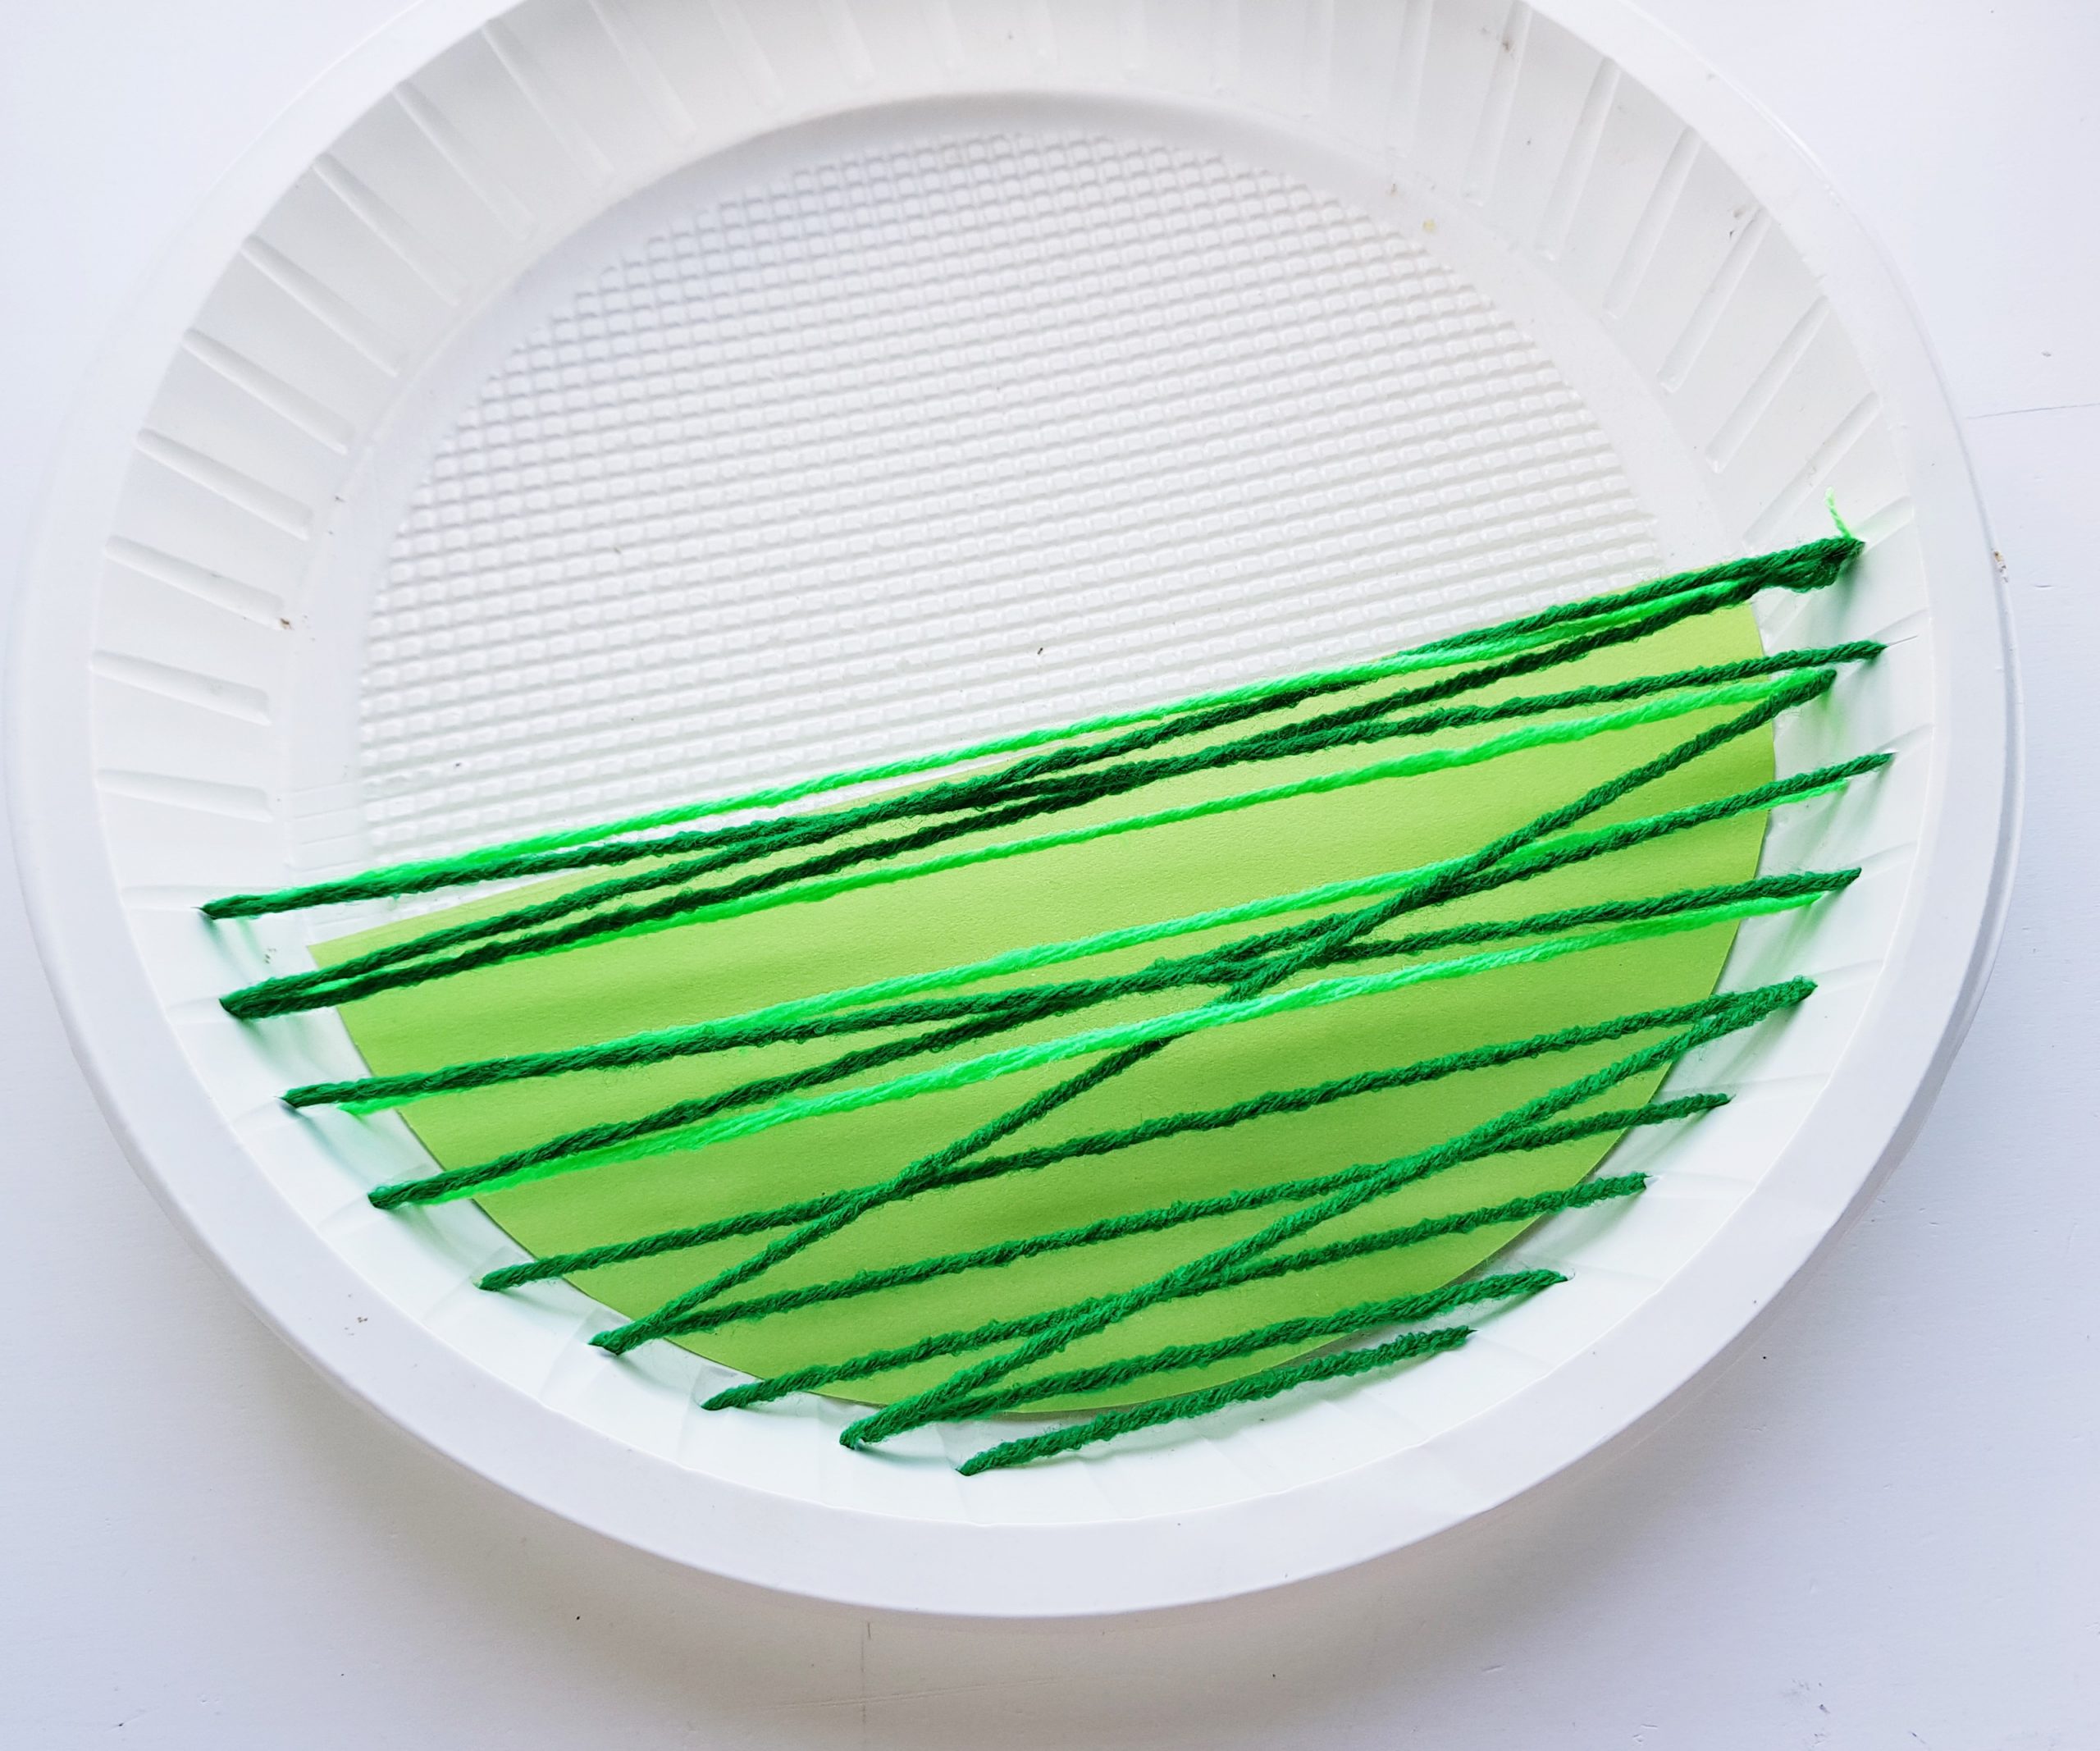 paper plate craft for kids